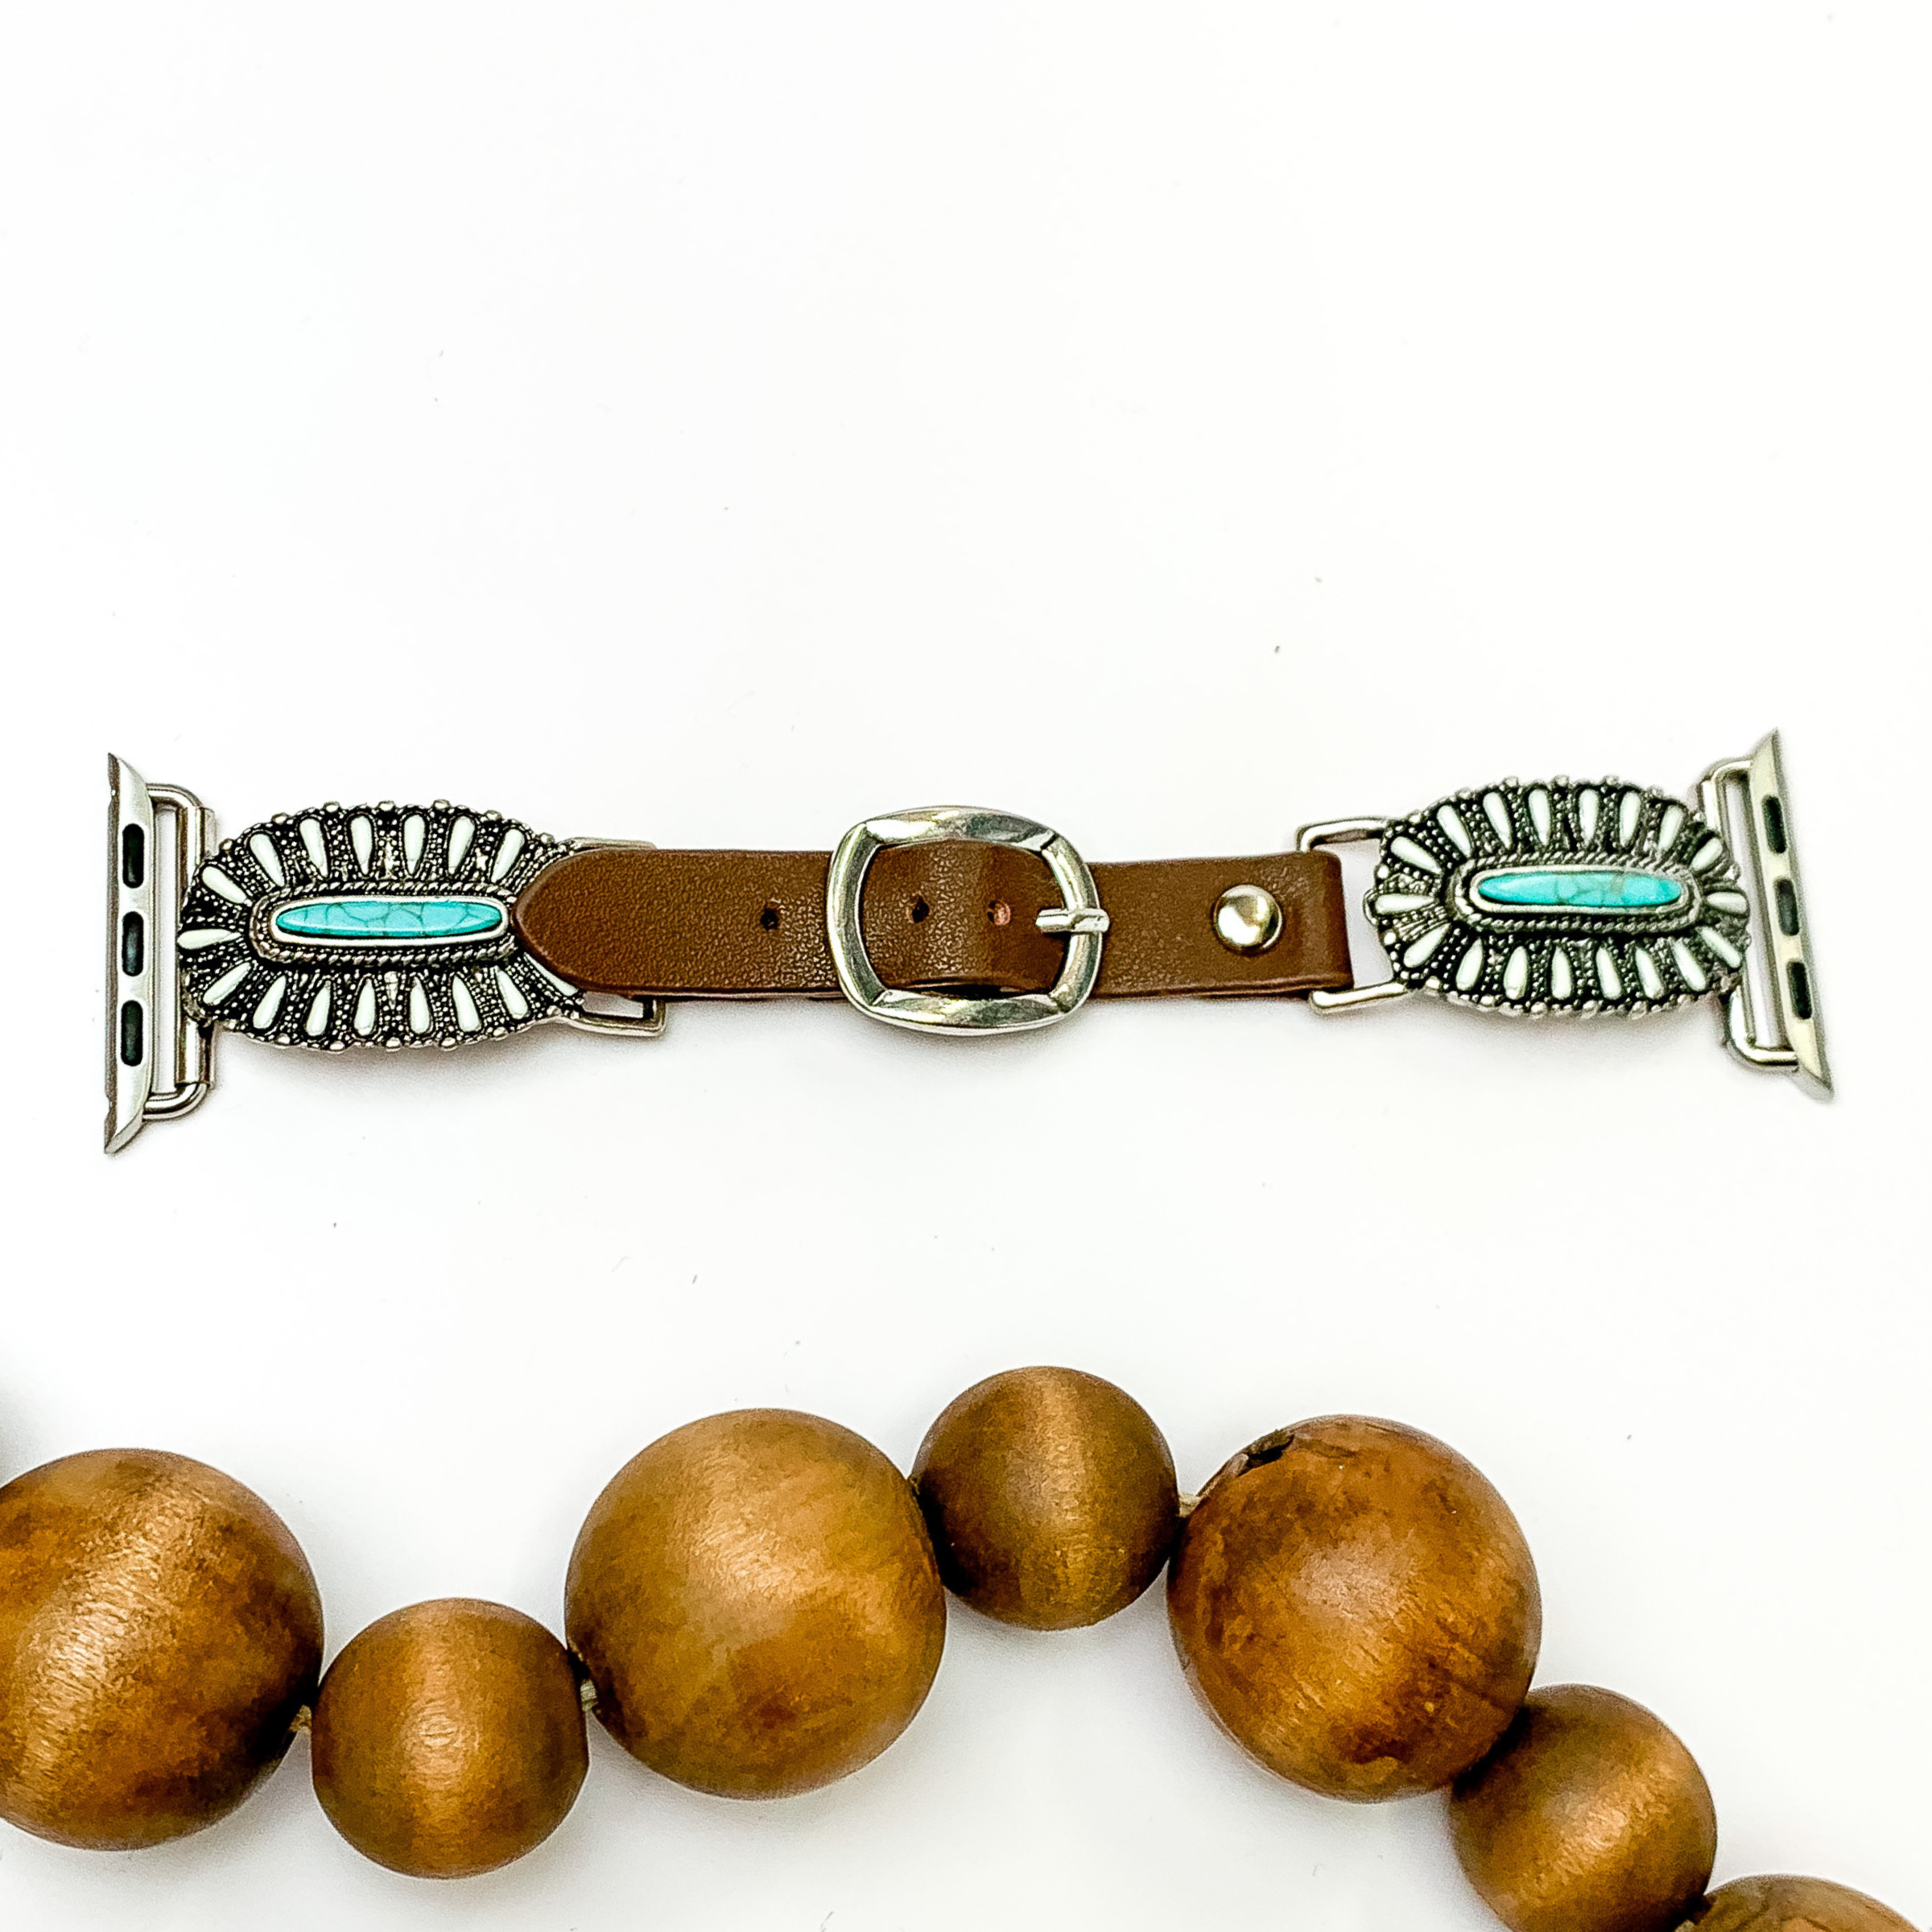 Dark Brown watch band with oval, stone cluster pendants and Apple watch band acessories. The pendants include mostly ivory stones with a center turquoise stone. This watch band is pictured on a white background with brown beads below the band. 